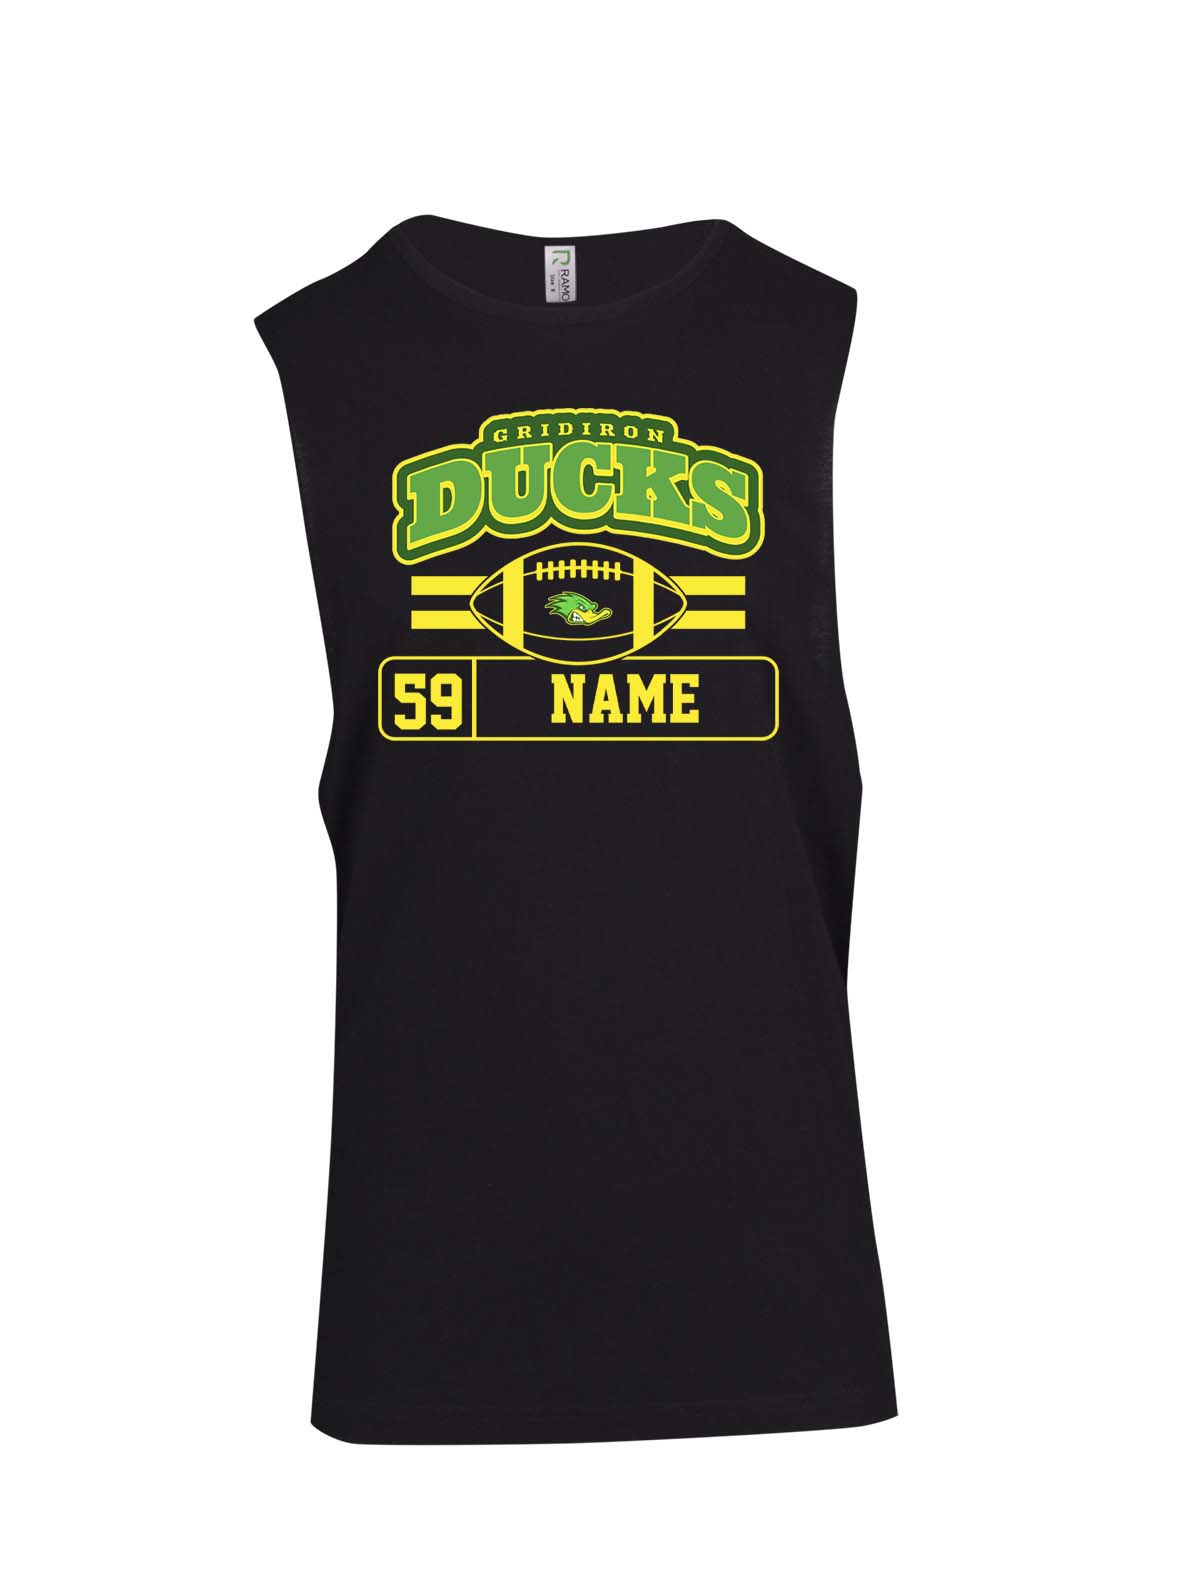 Vincent City Ducks Name and Number Muscle Shirt